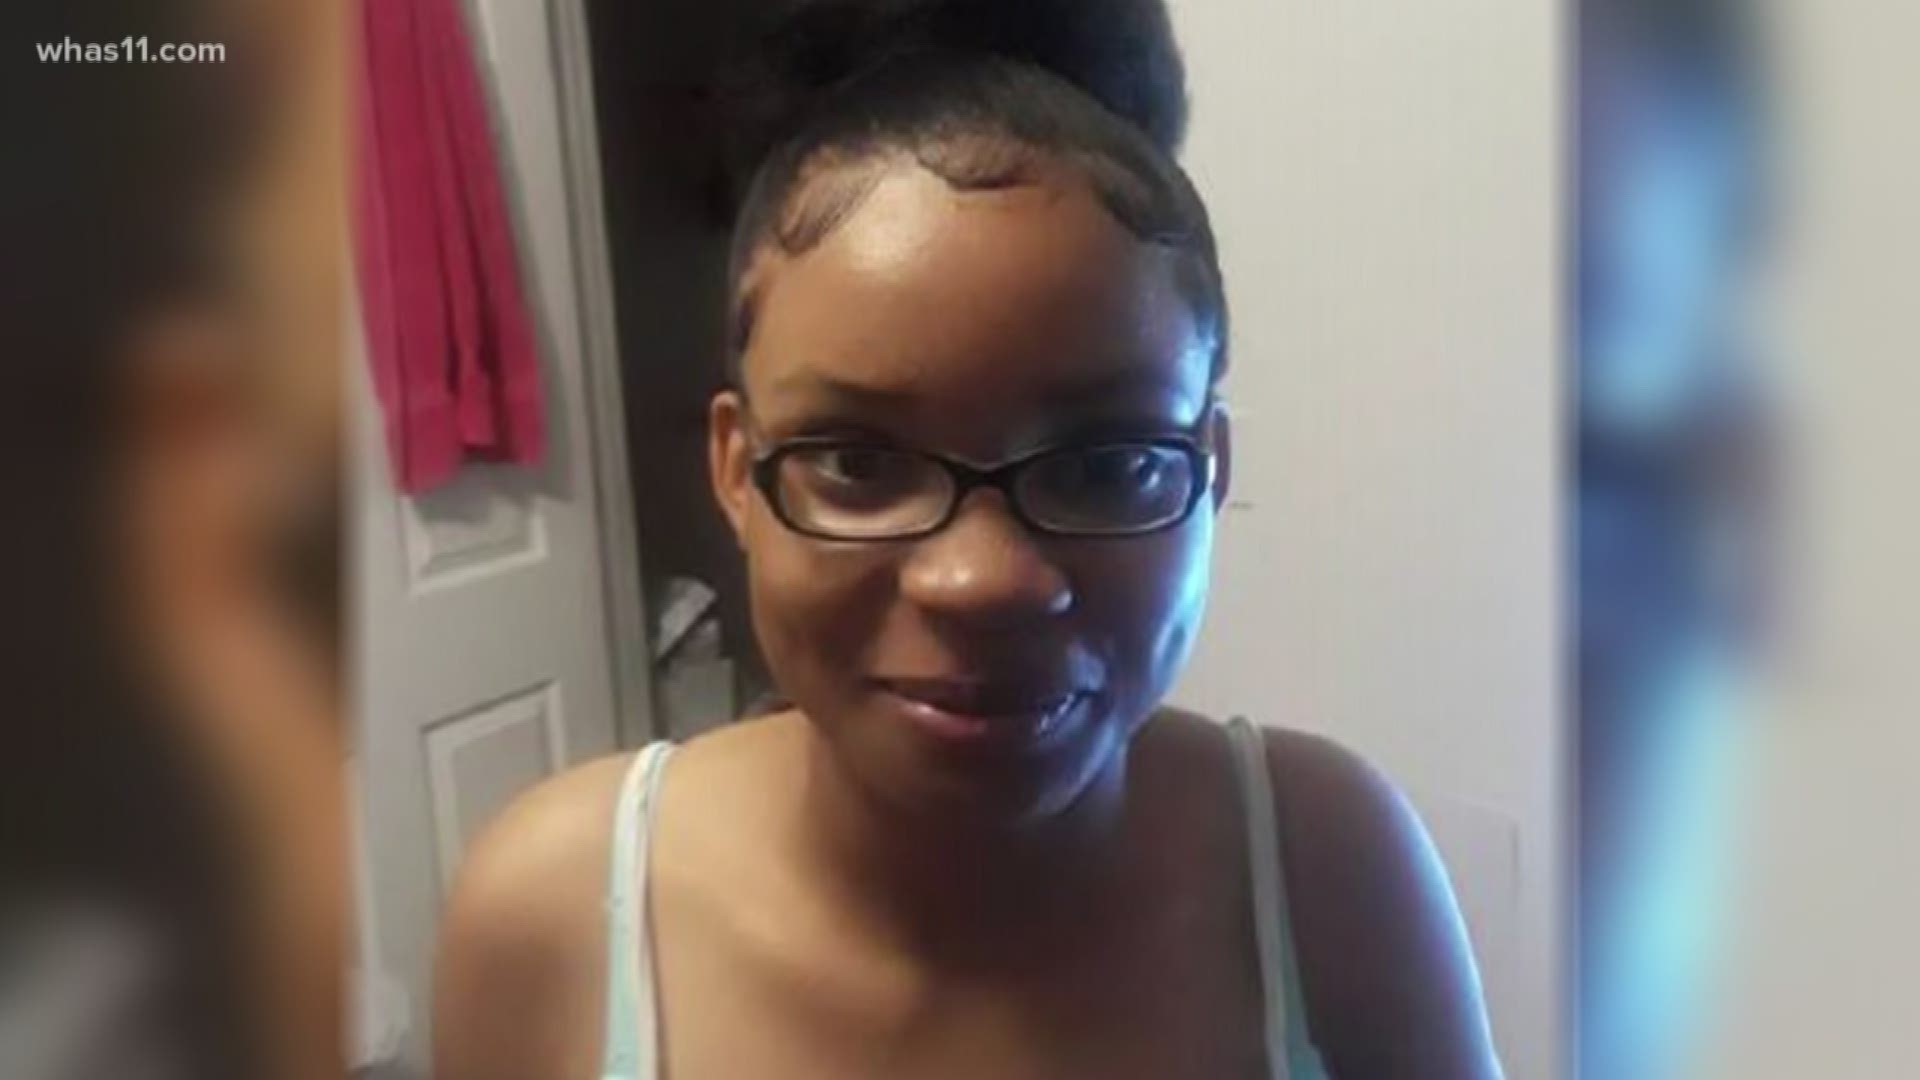 Louisville Metro Police are asking for the public's help to locate a missing 15-year-old girl from the Portland neighborhood.